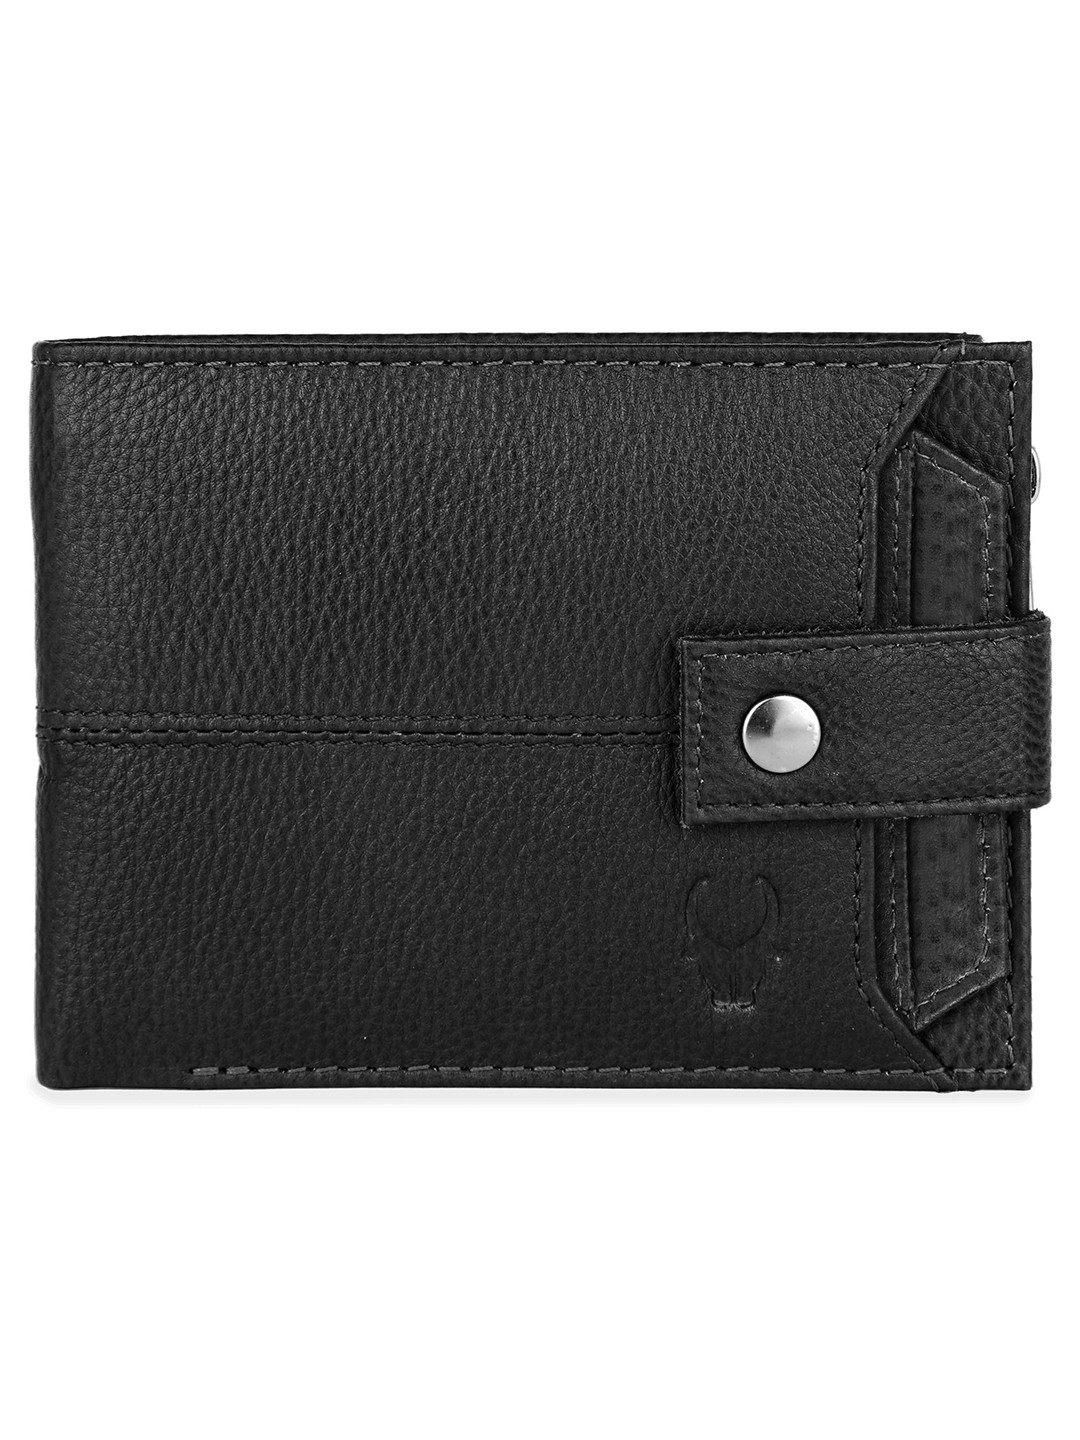 WildHorn Leather Wallet for Men I Ultra Strong Stitching I 6 Credit Card  Slots I 2 Currency Compartments I 1 Coin Pocket